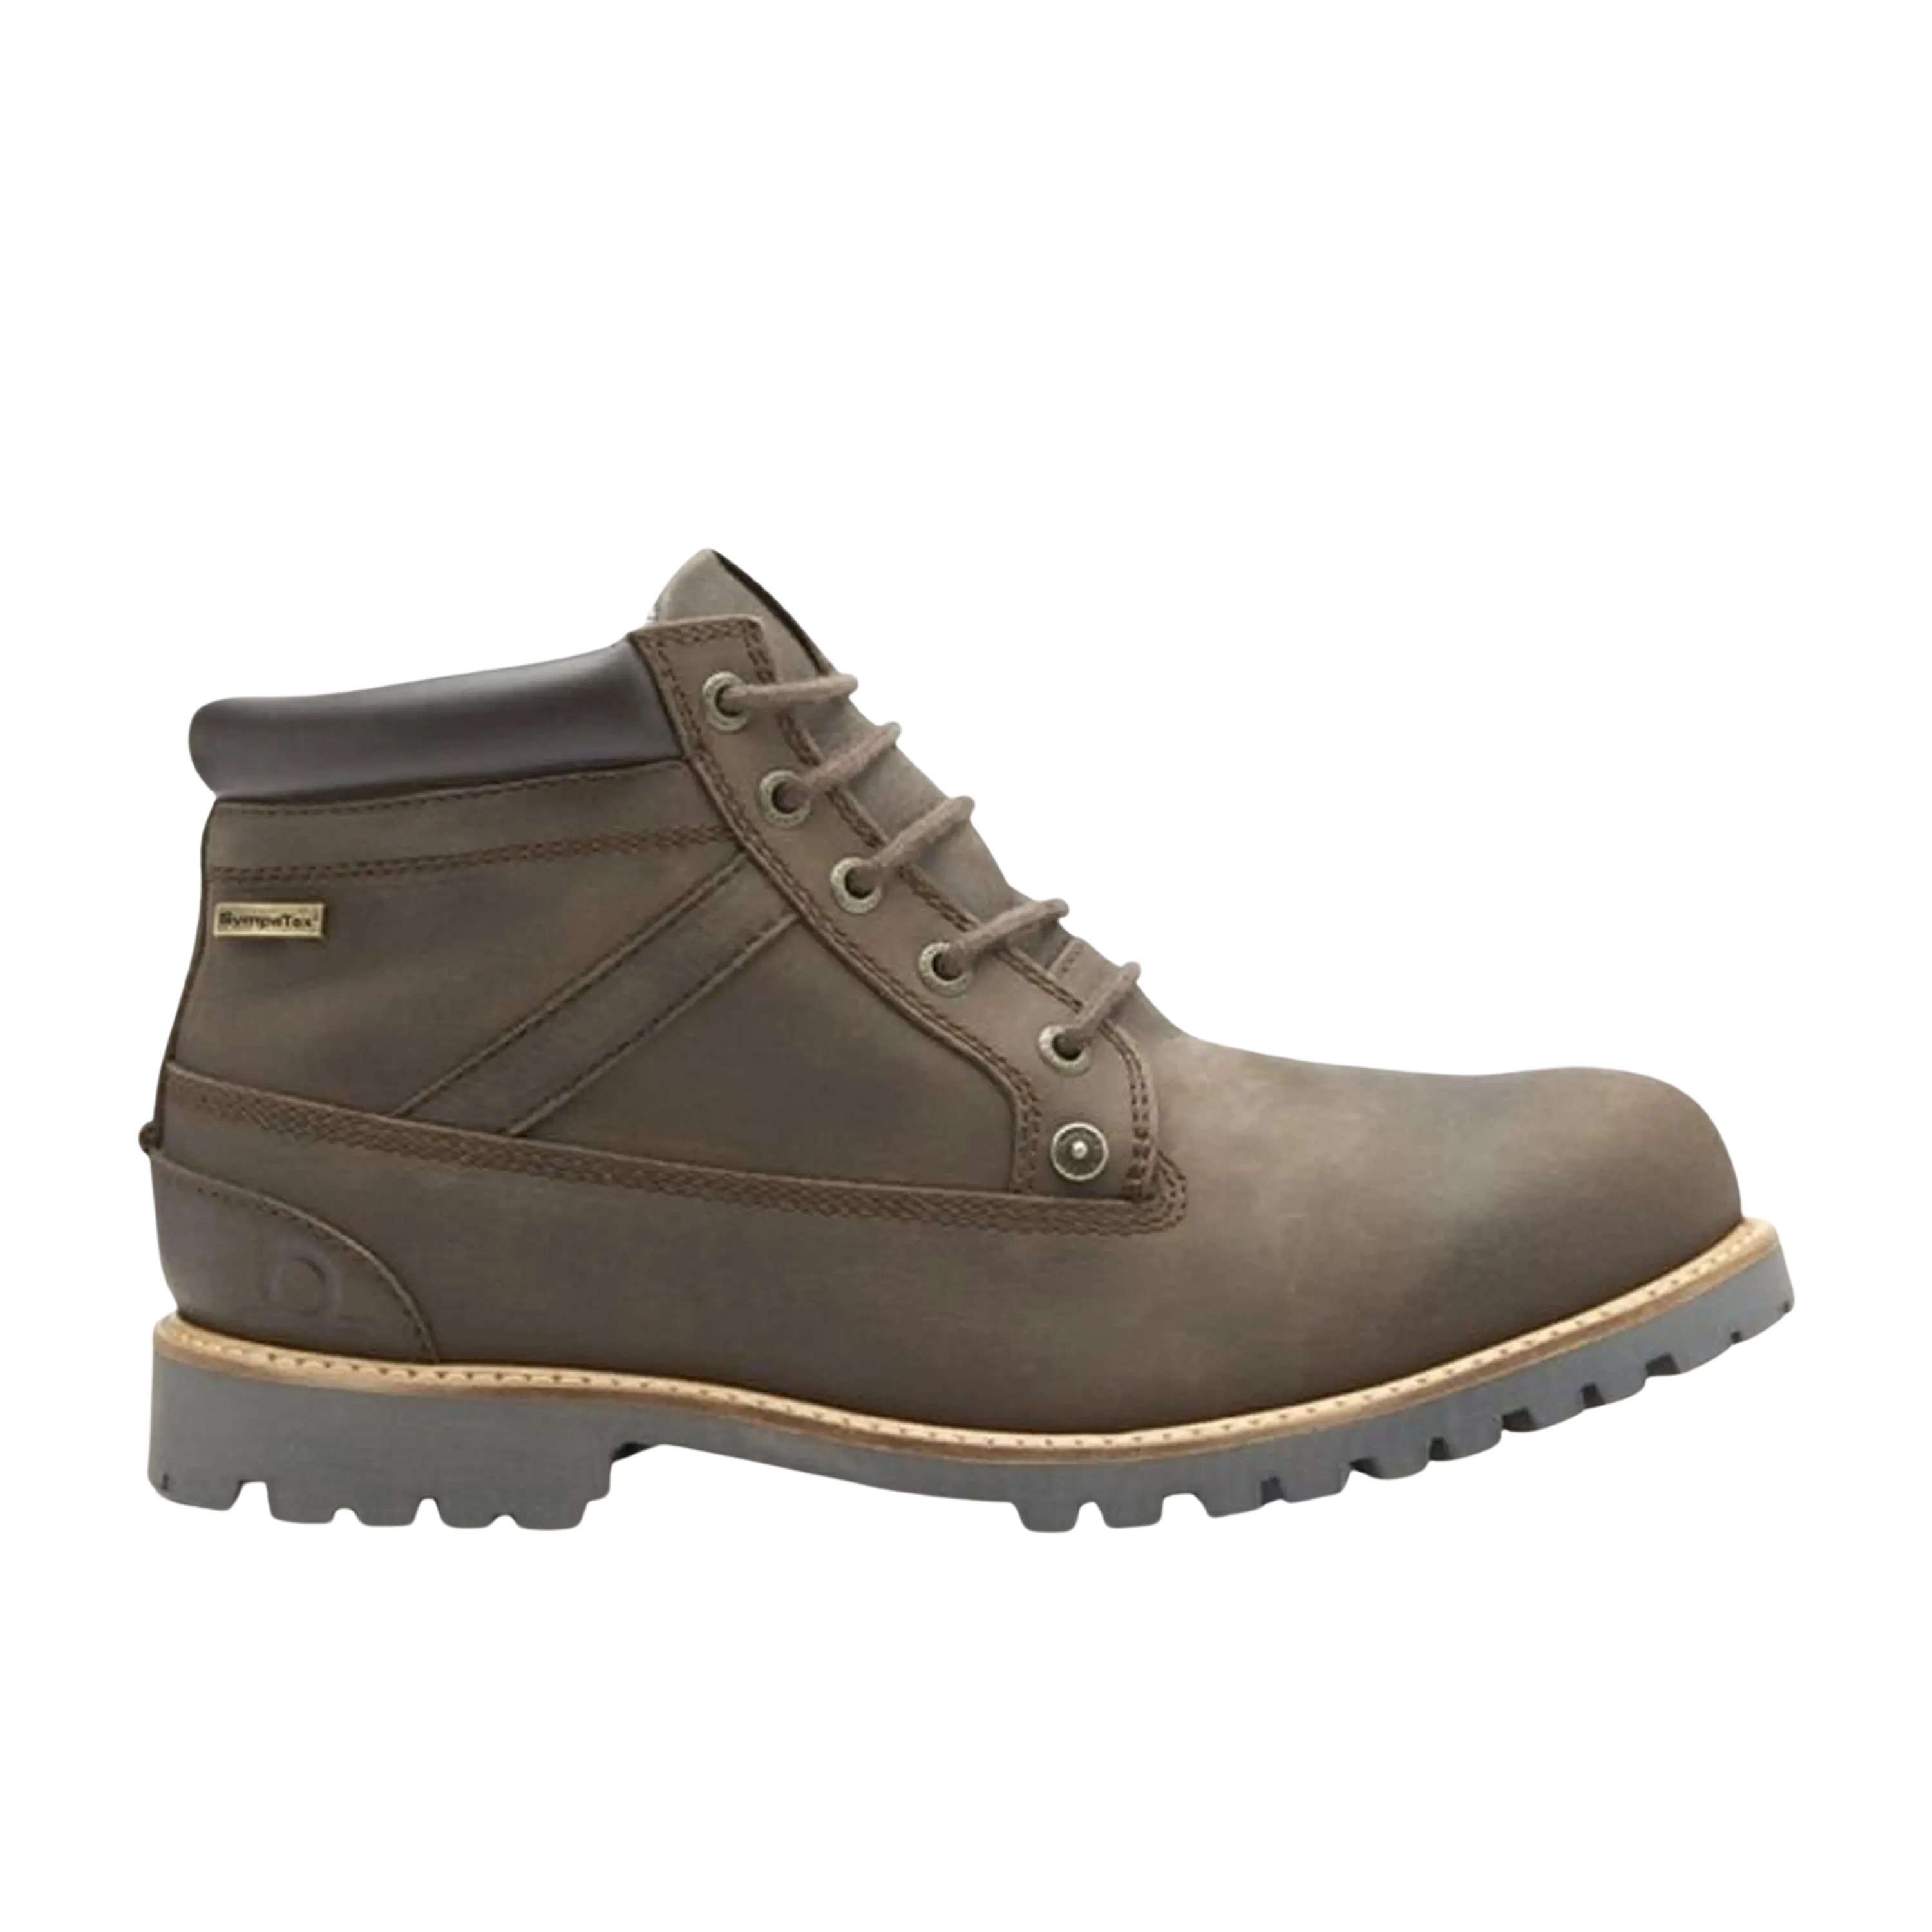 Chatham Grampian Waterproof Ankle Boots for Men